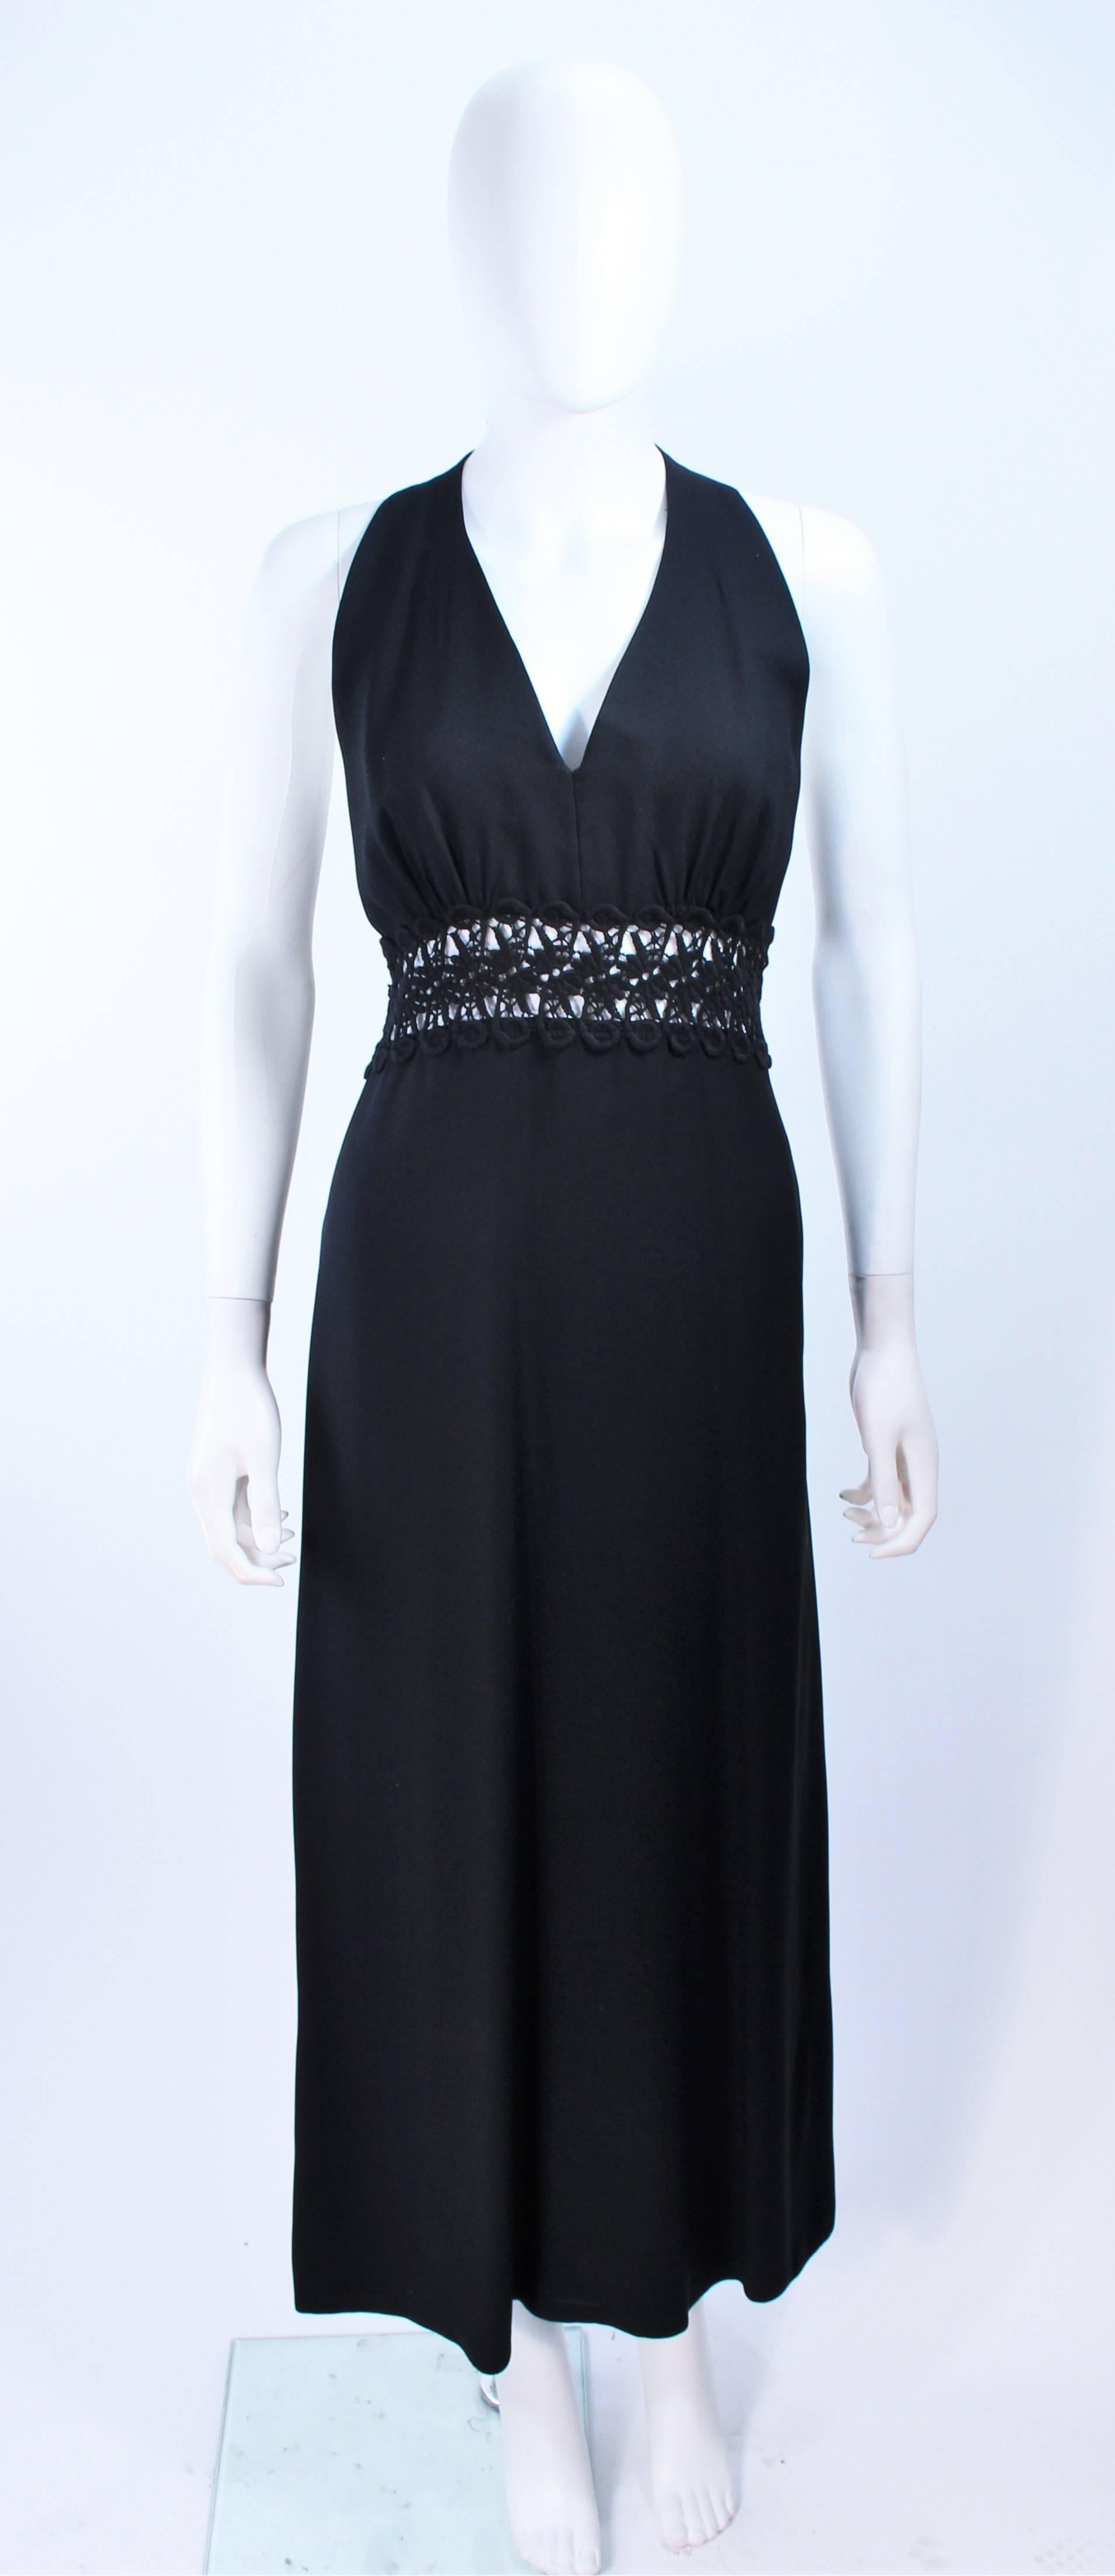 This Algo design is composed of a black fabric with a lace waist insert detail. Features a lace racer back with a center back zipper closure. In excellent vintage condition.

**Please cross-reference measurements for personal accuracy. Size in